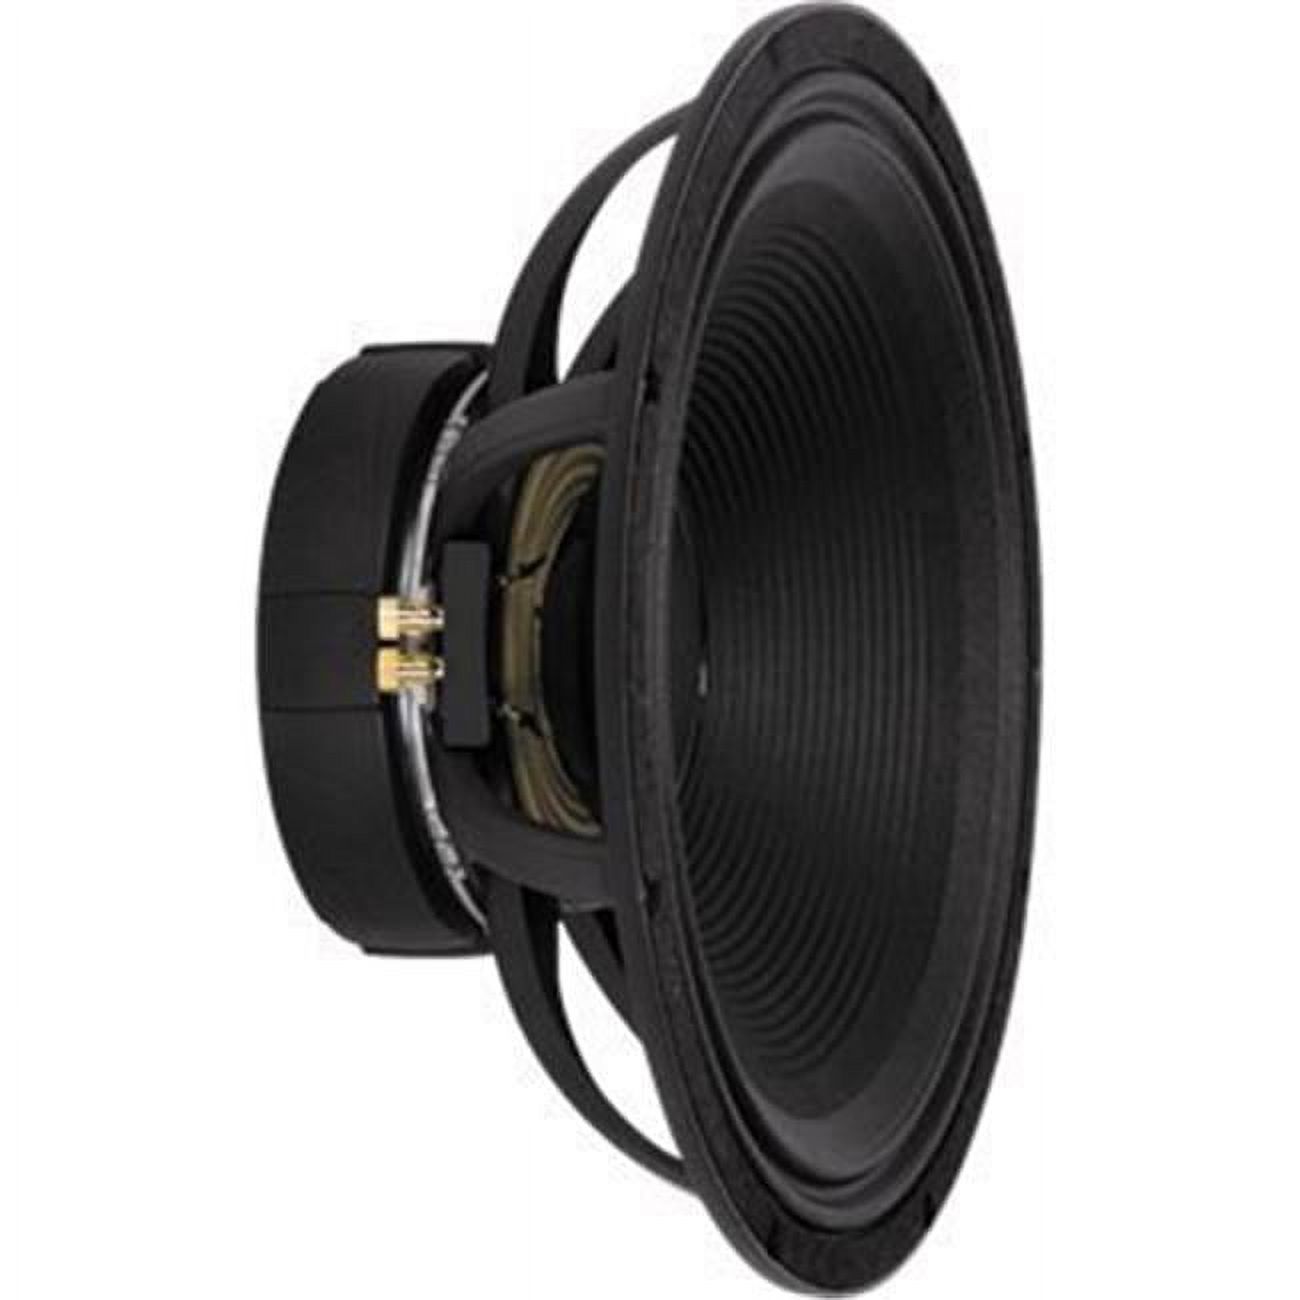 Peavey 560600 18 Inch 3200 W Low Rider Professional Performing Subwoofer Speaker - image 1 of 2